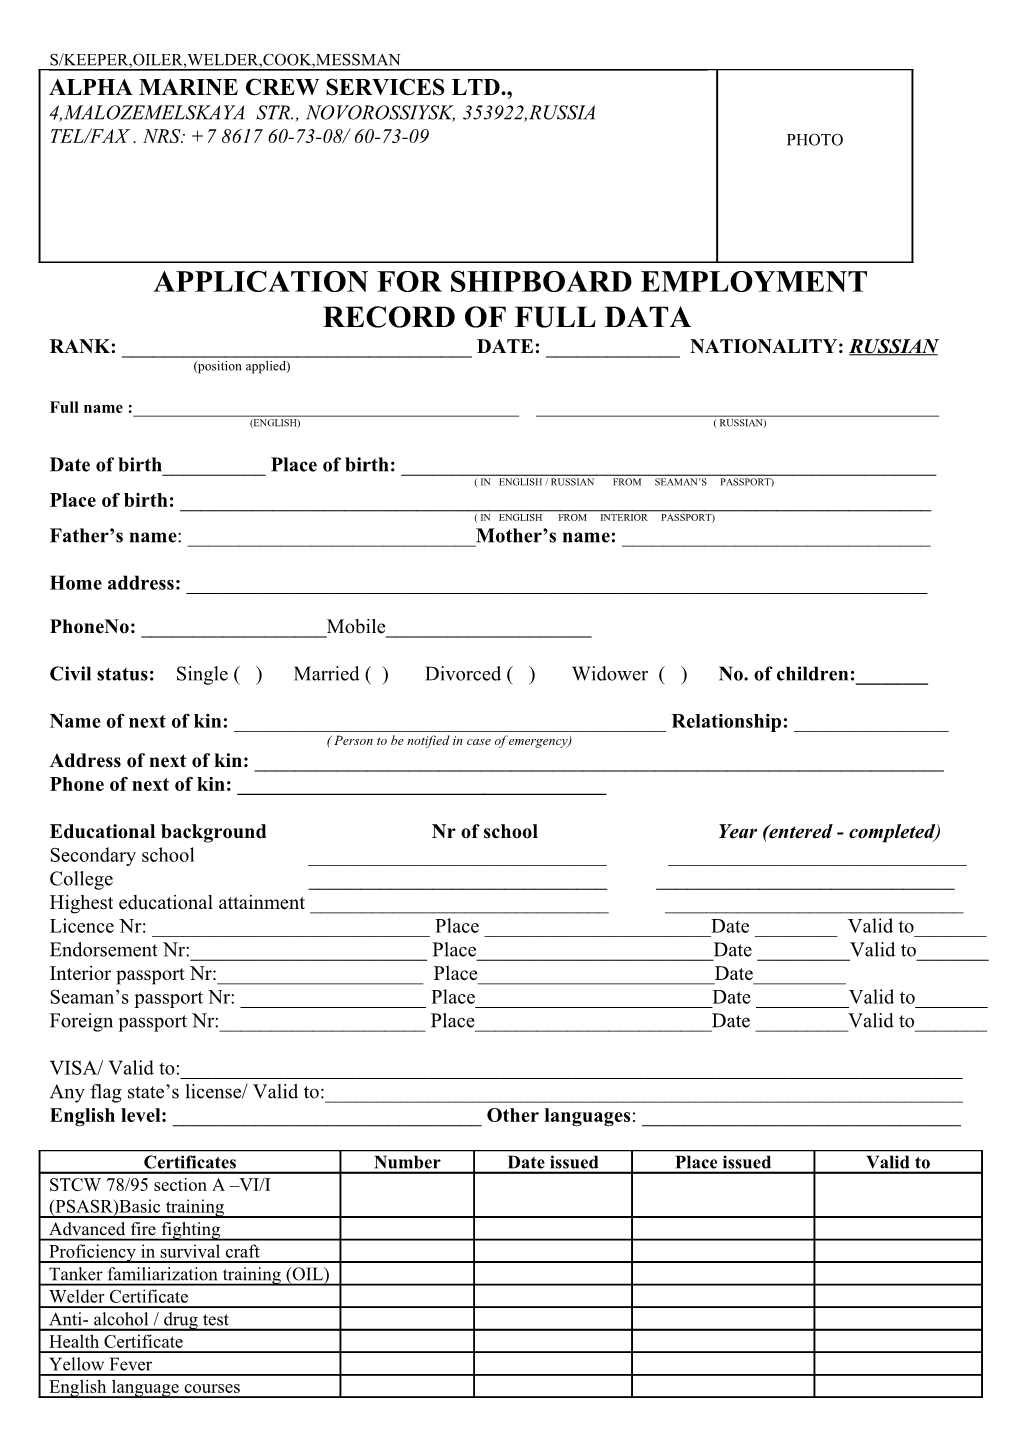 Application for Shipboard Employment